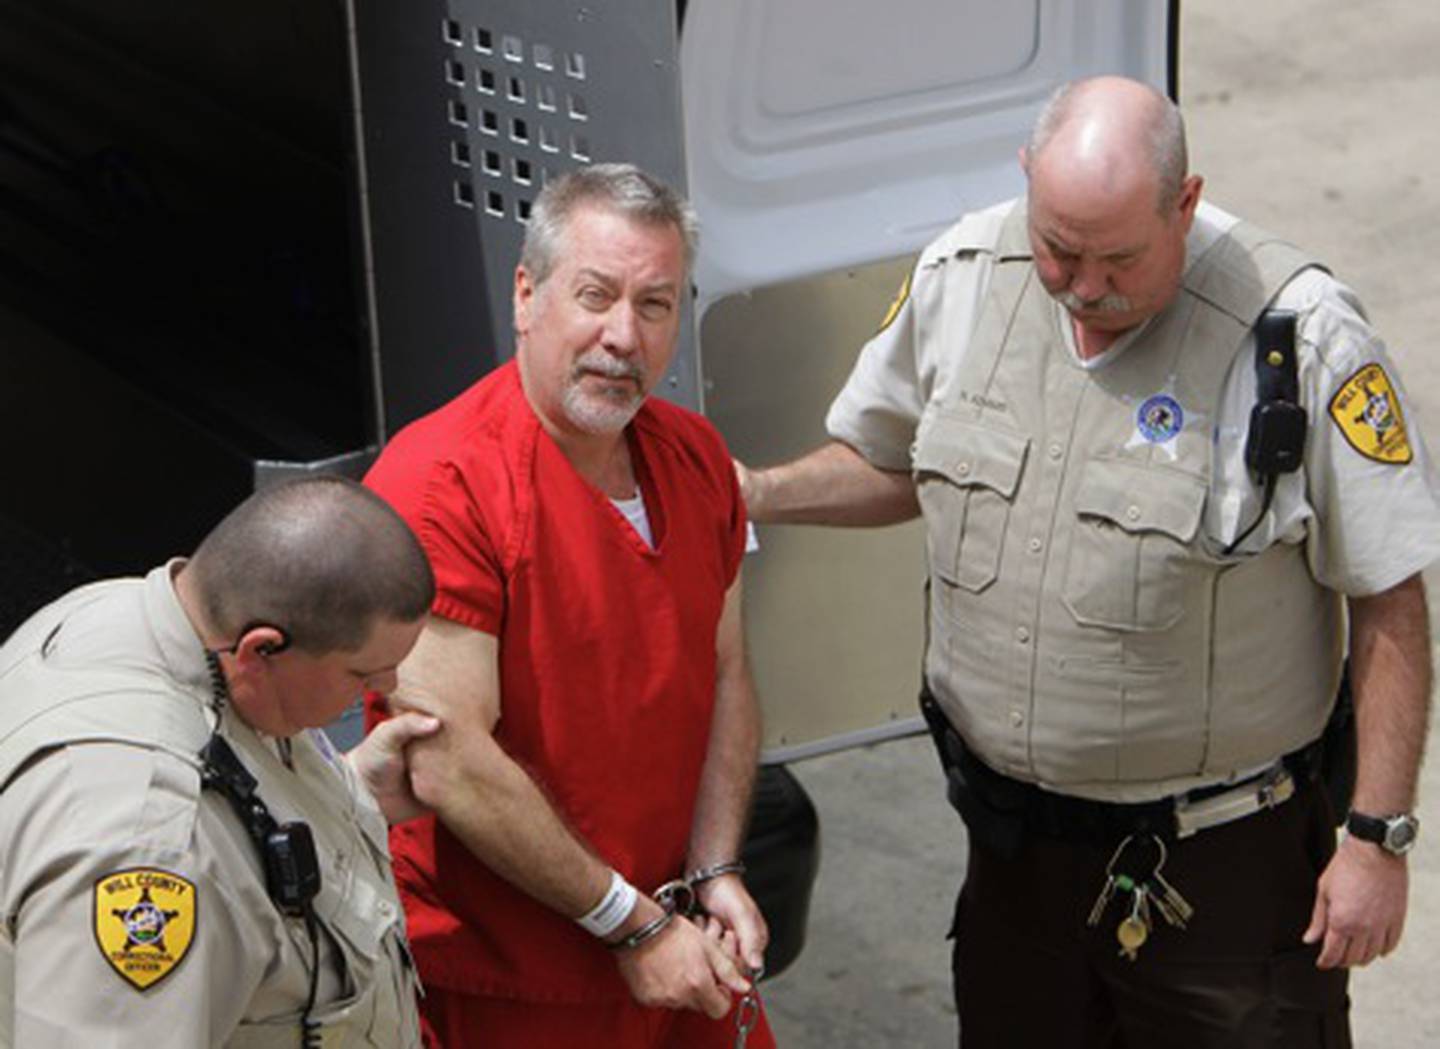 In this May 8, 2009 file photo, former Bolingbrook, Ill, police sergeant Drew Peterson, center, arrives at the Will County Courthouse in Joliet, Ill. On Monday, May 18, 2009, Peterson is scheduled to be arraigned on first-degree murder charges in the 2004 drowning death of his third wife Kathleen Savio.